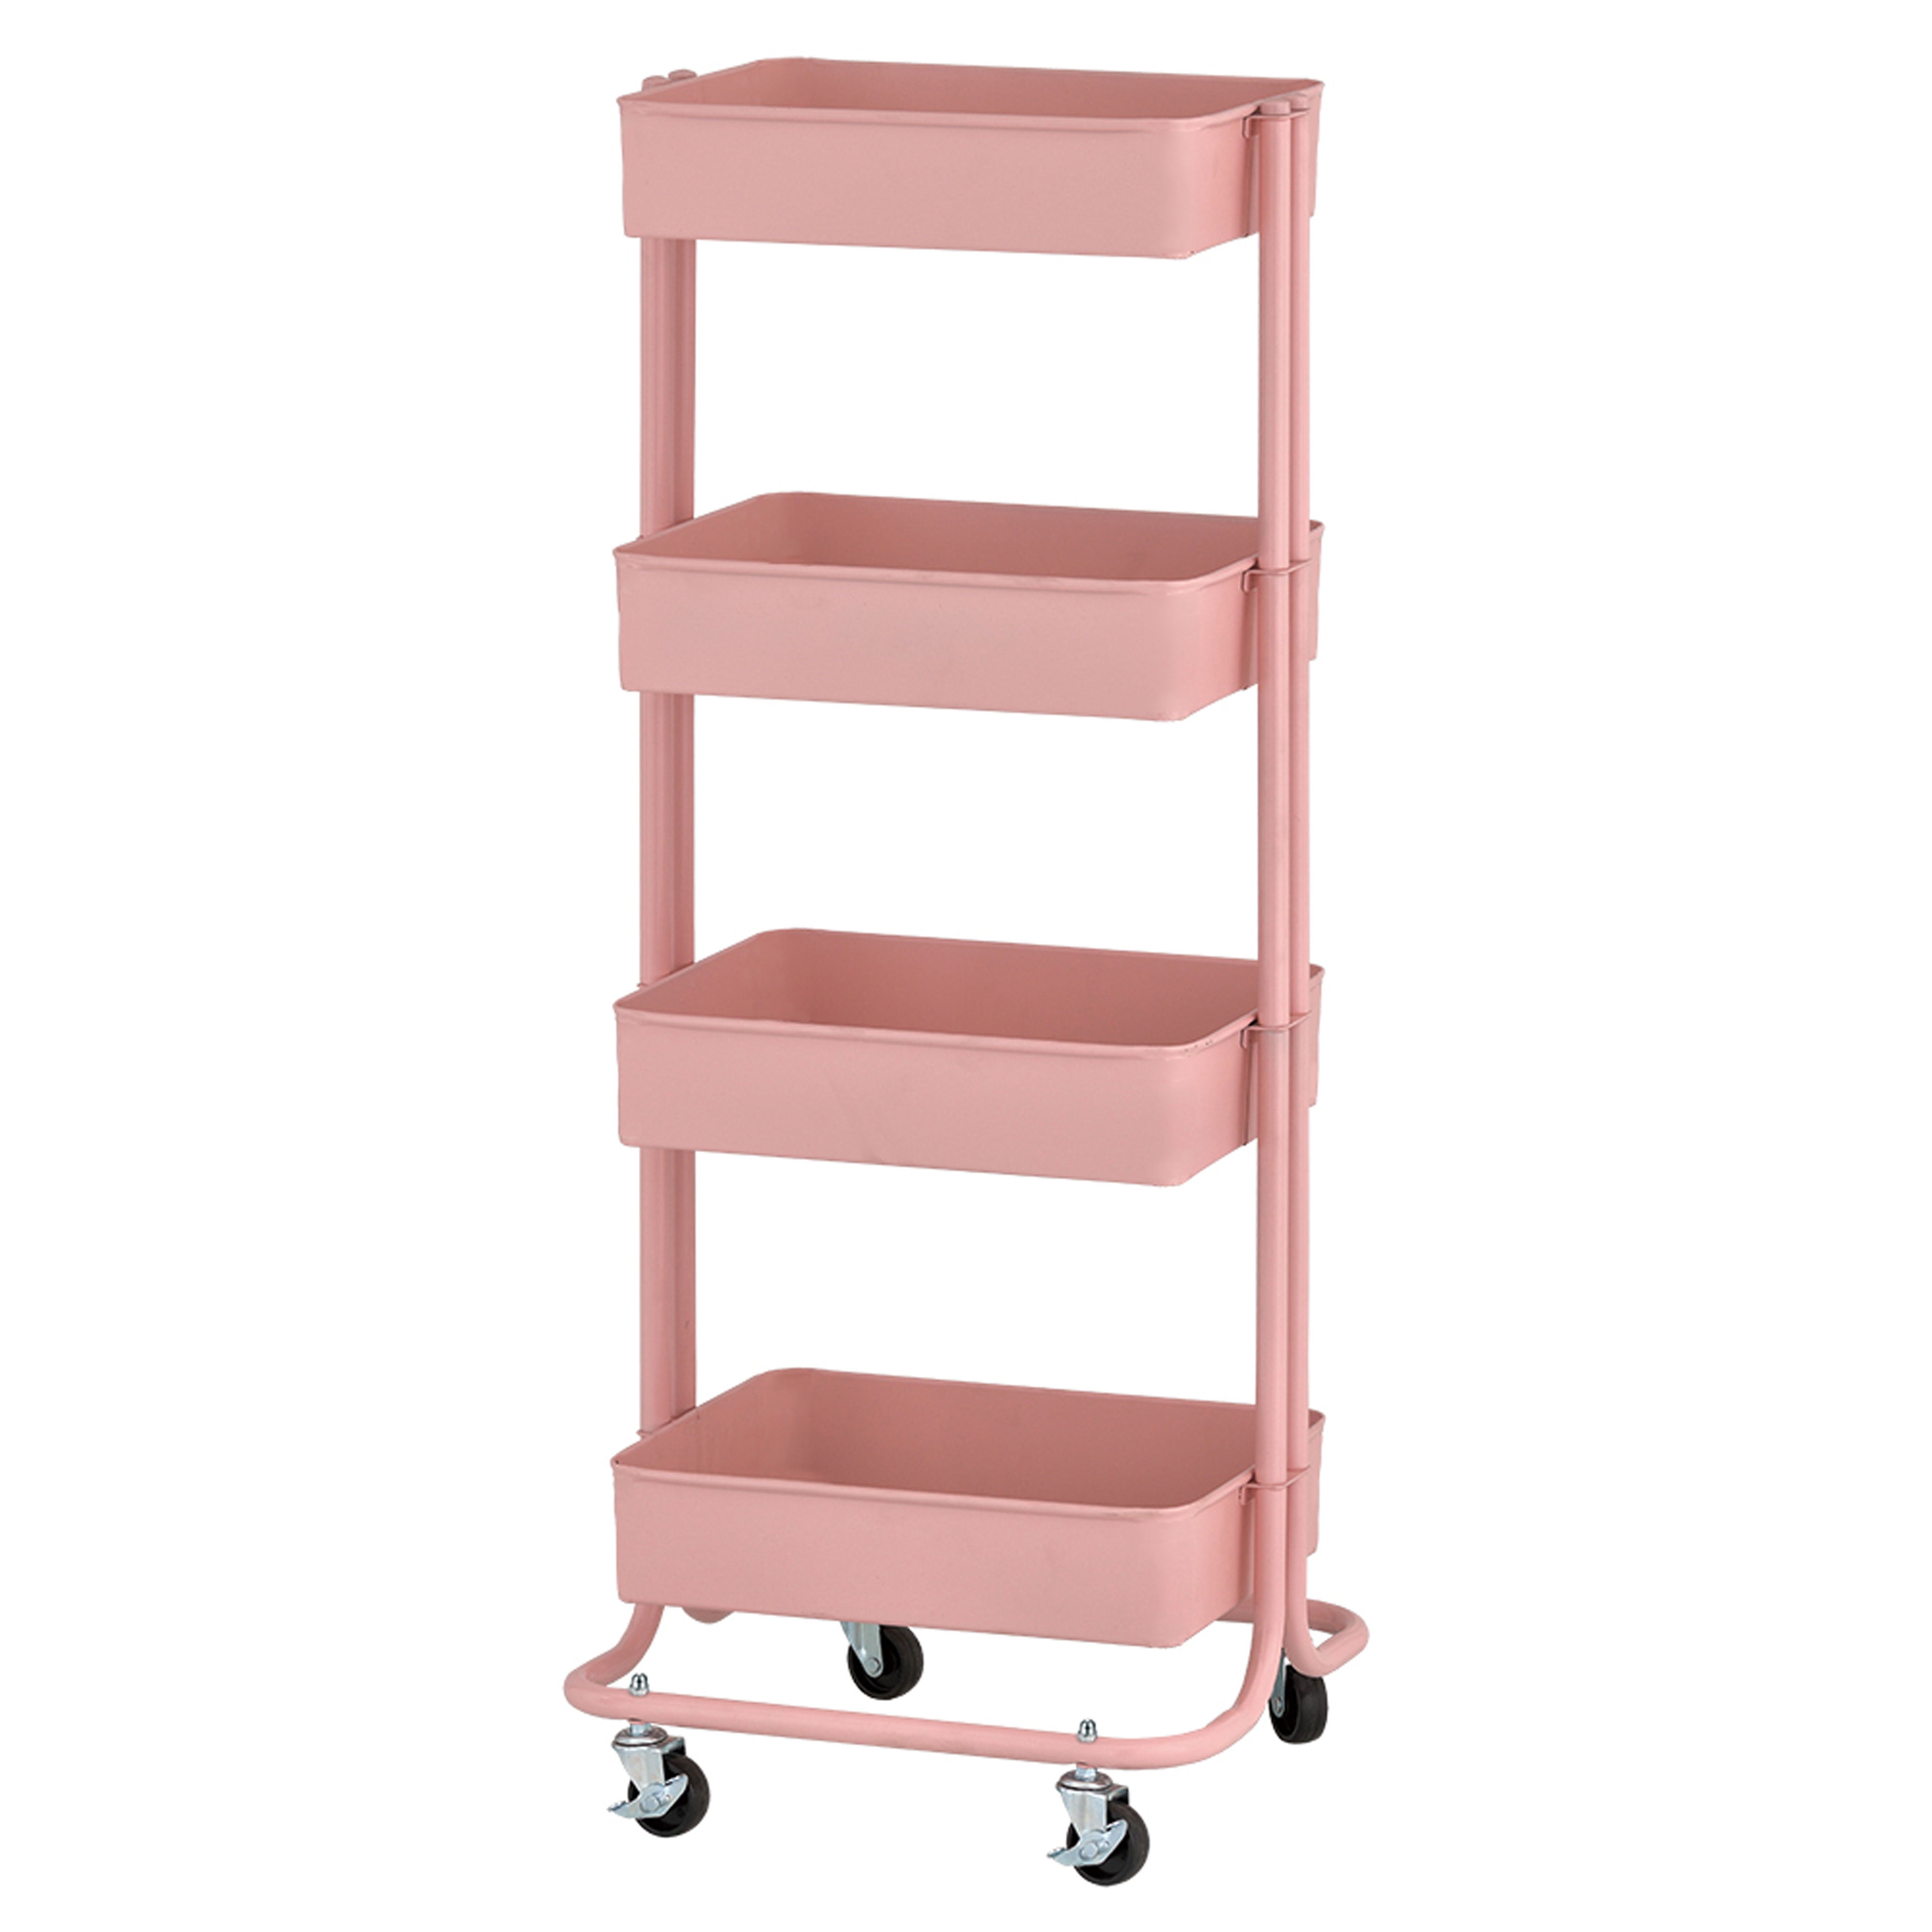 Honey-Can-Do Wrapping Paper Storage Cart with Wheels Grey